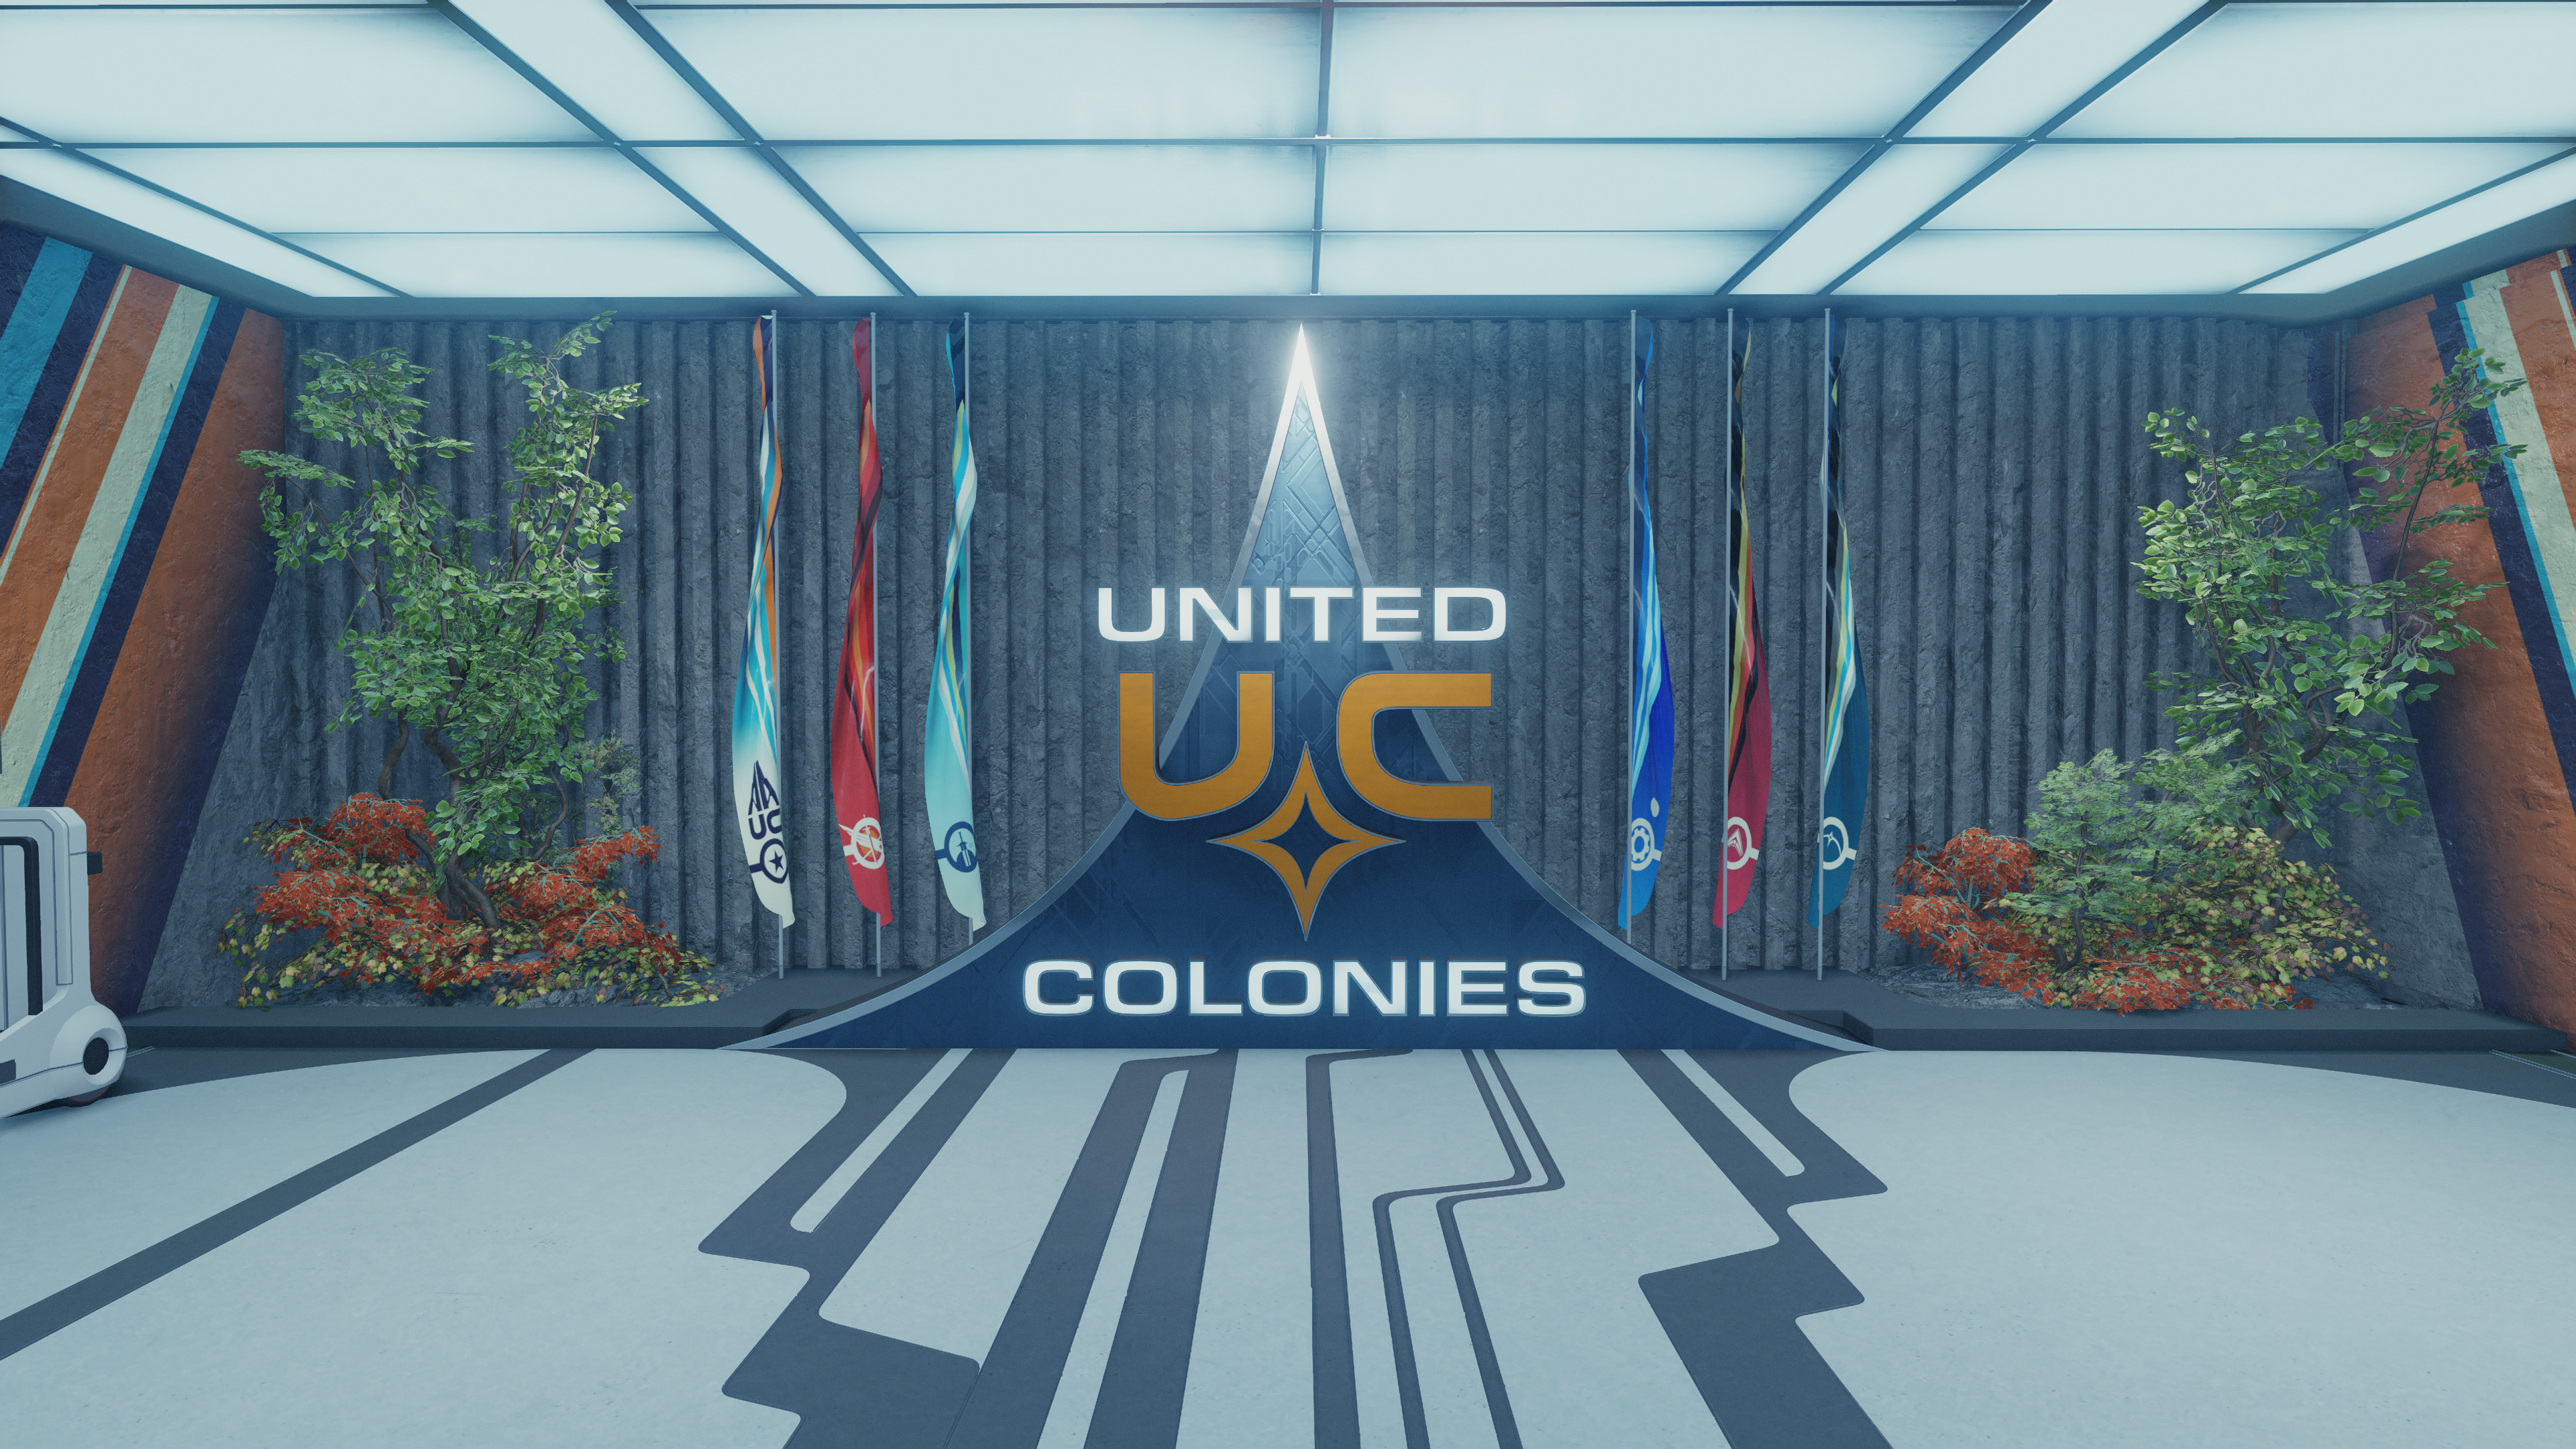 Photo of United Colonies logo